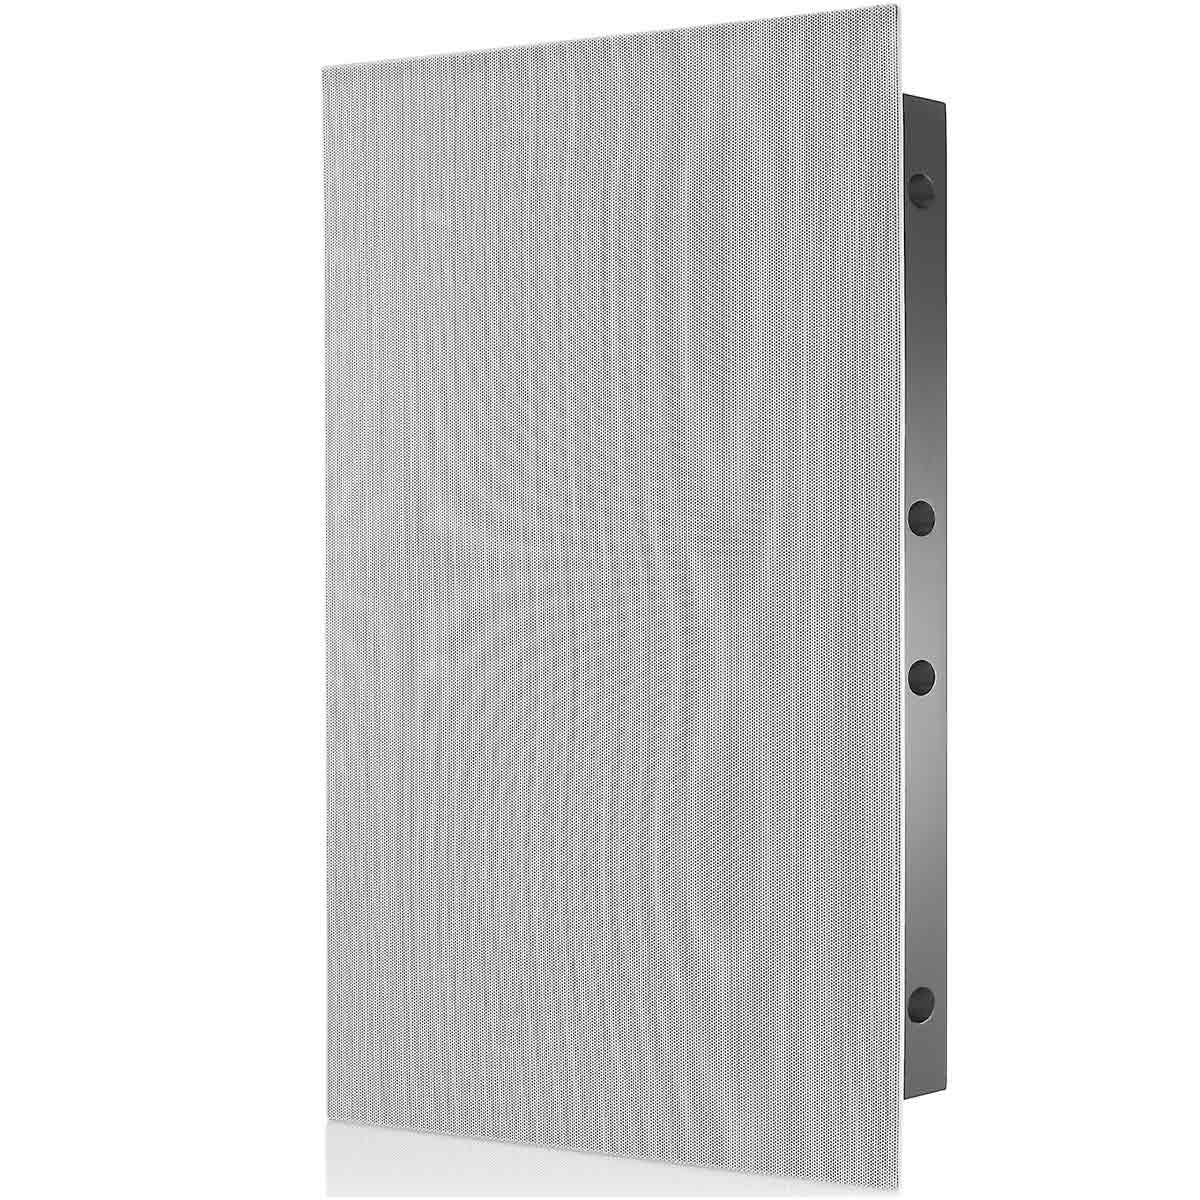 Revel B28W Architectural In-Wall Subwoofer - angled front view with grille